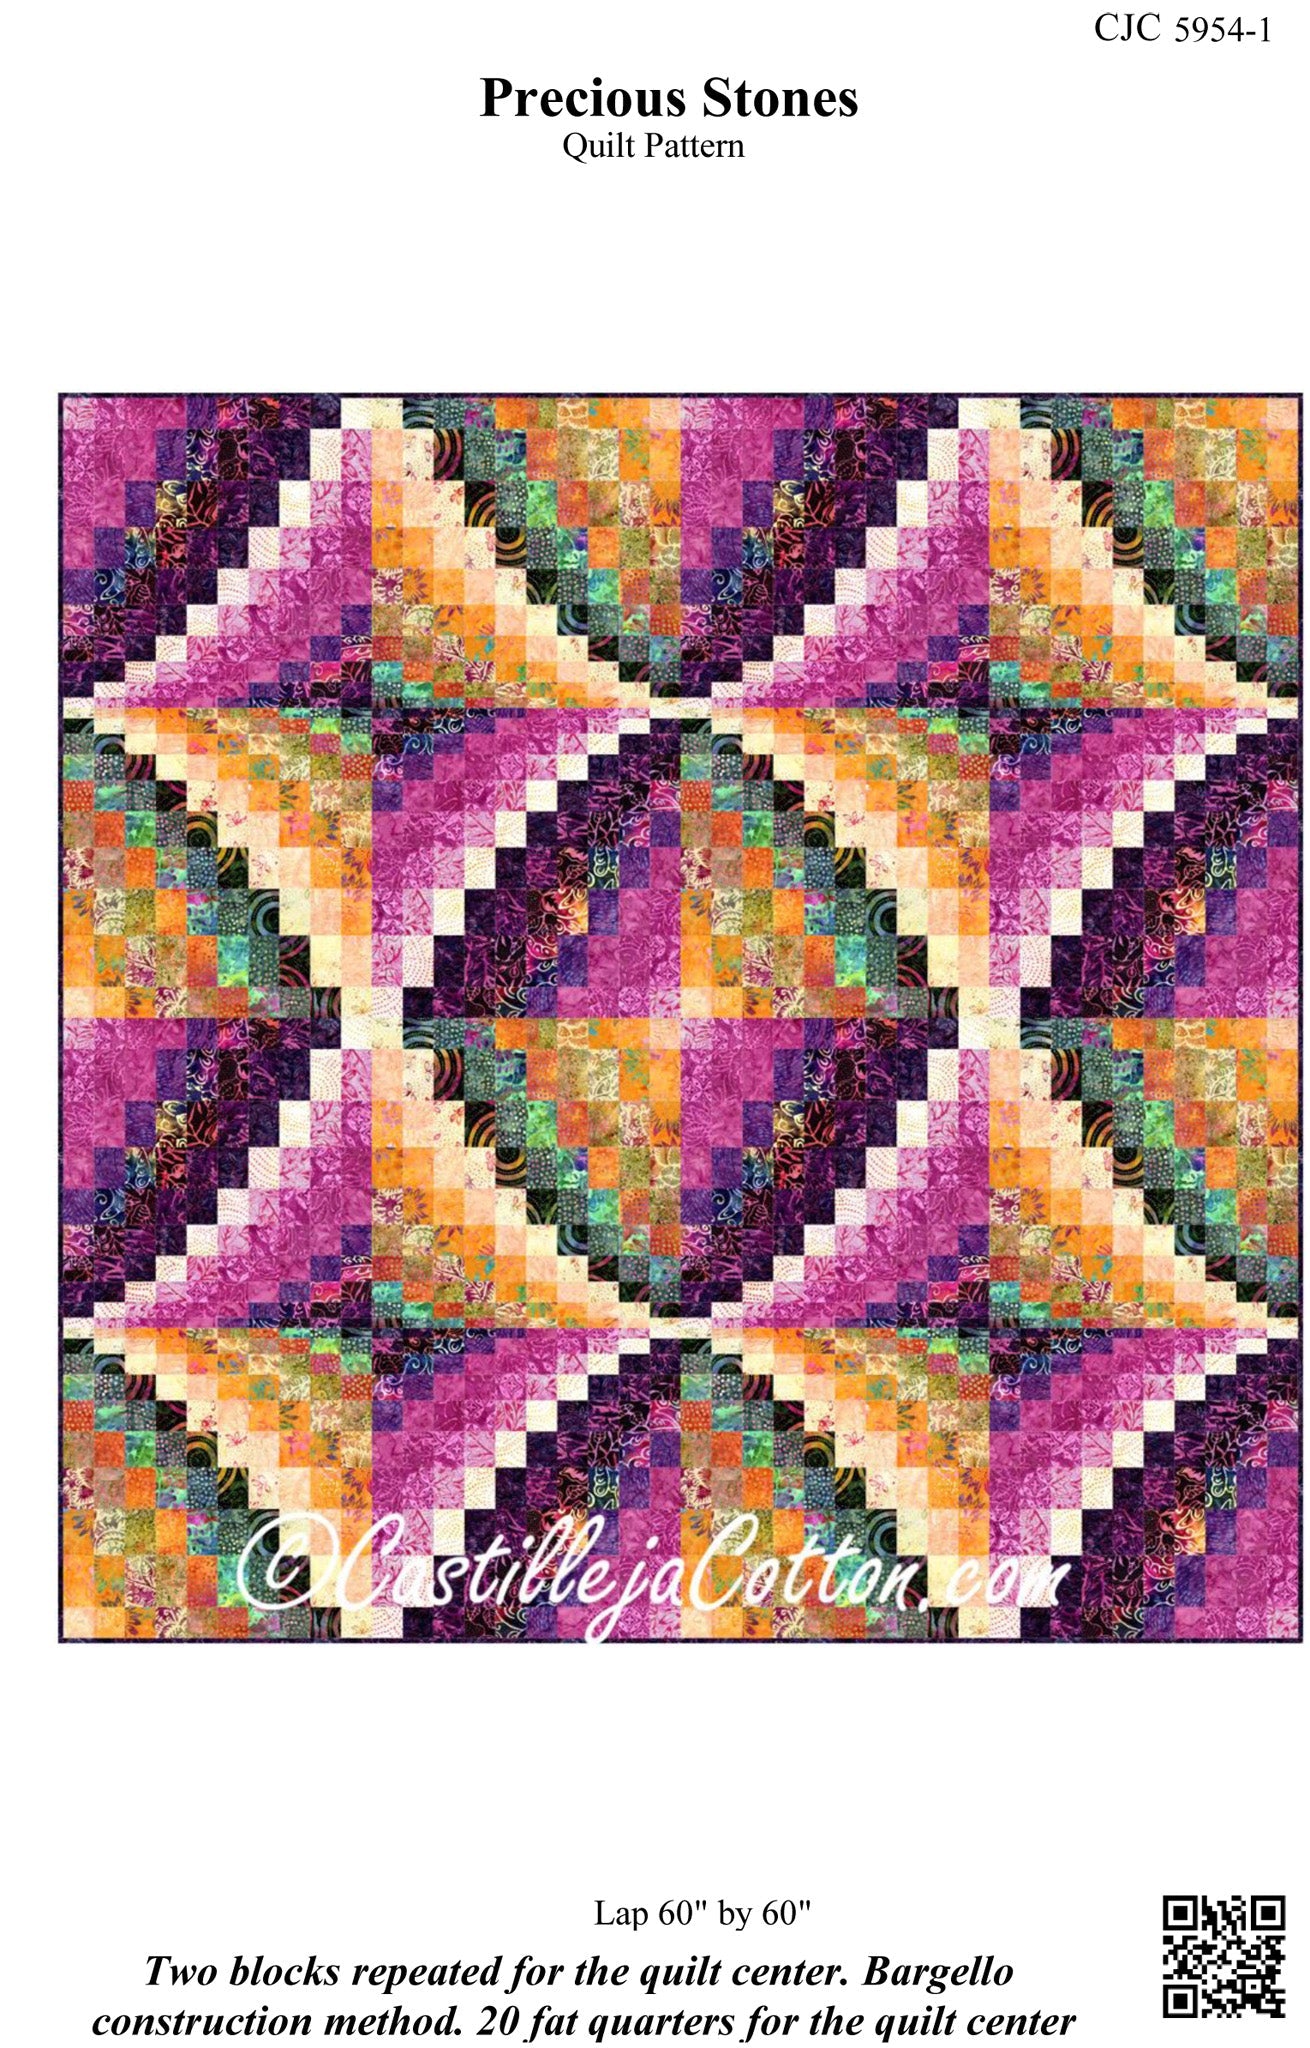 Cover image of pattern of Precious Stones quilt.